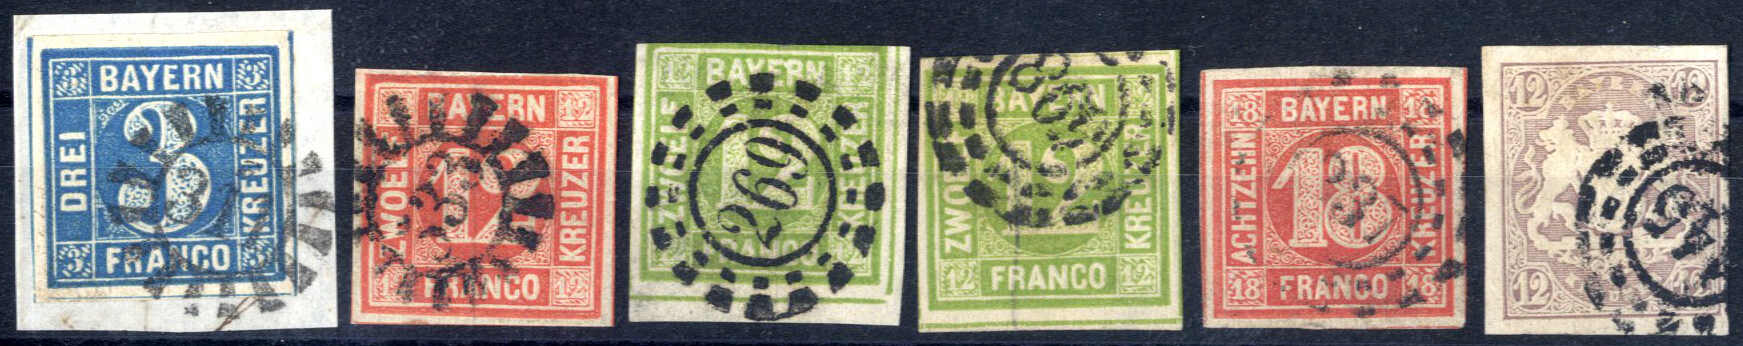 Lot 3054 - germany old german states bavaria -  Viennafil Auktionen Auction #66 Worldwide Mail Auction: Italy, Austria, Germany, Europe and Overseas